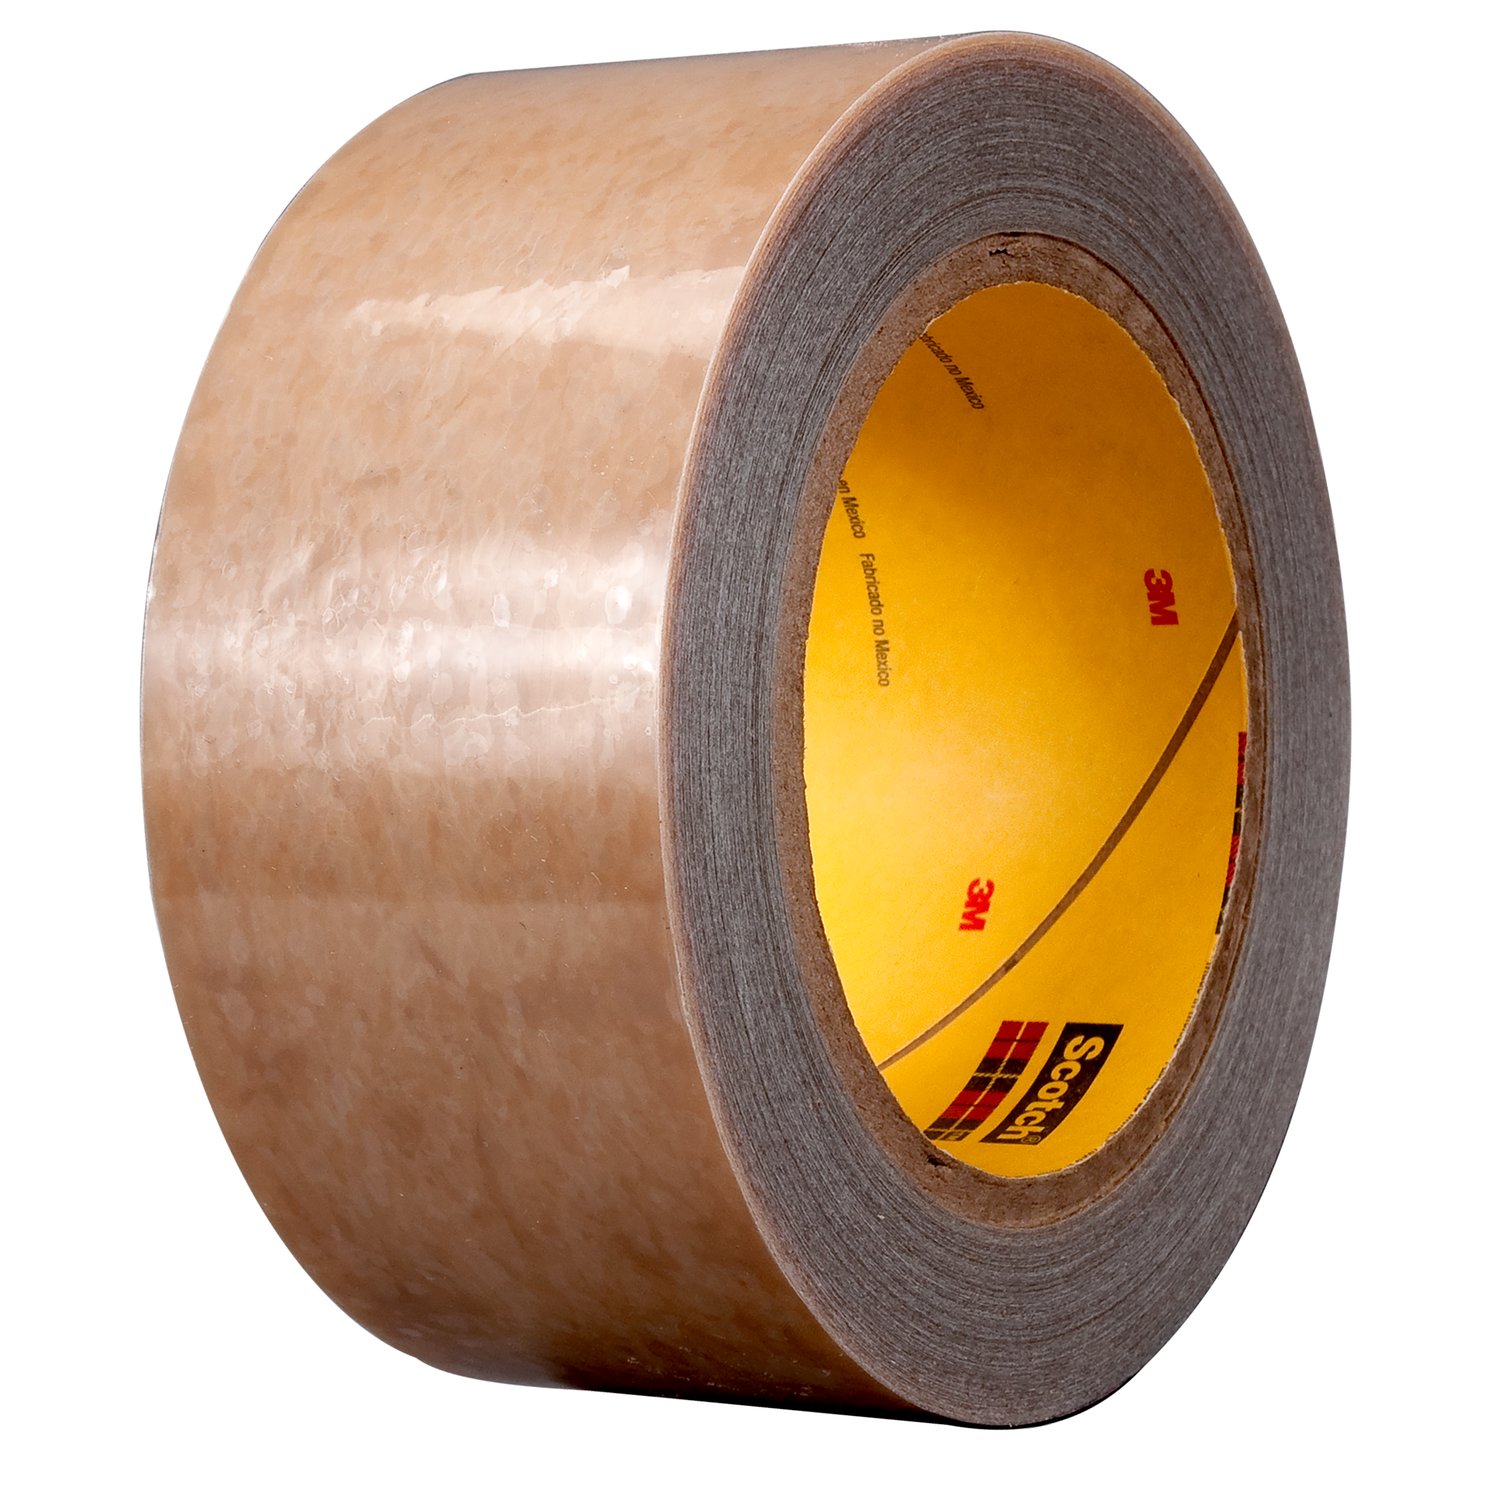 7000123307 - 3M Polyester Protective Tape 336, Transparent, 4 in x 144 yd, 1.5 mil,
2 rolls per case